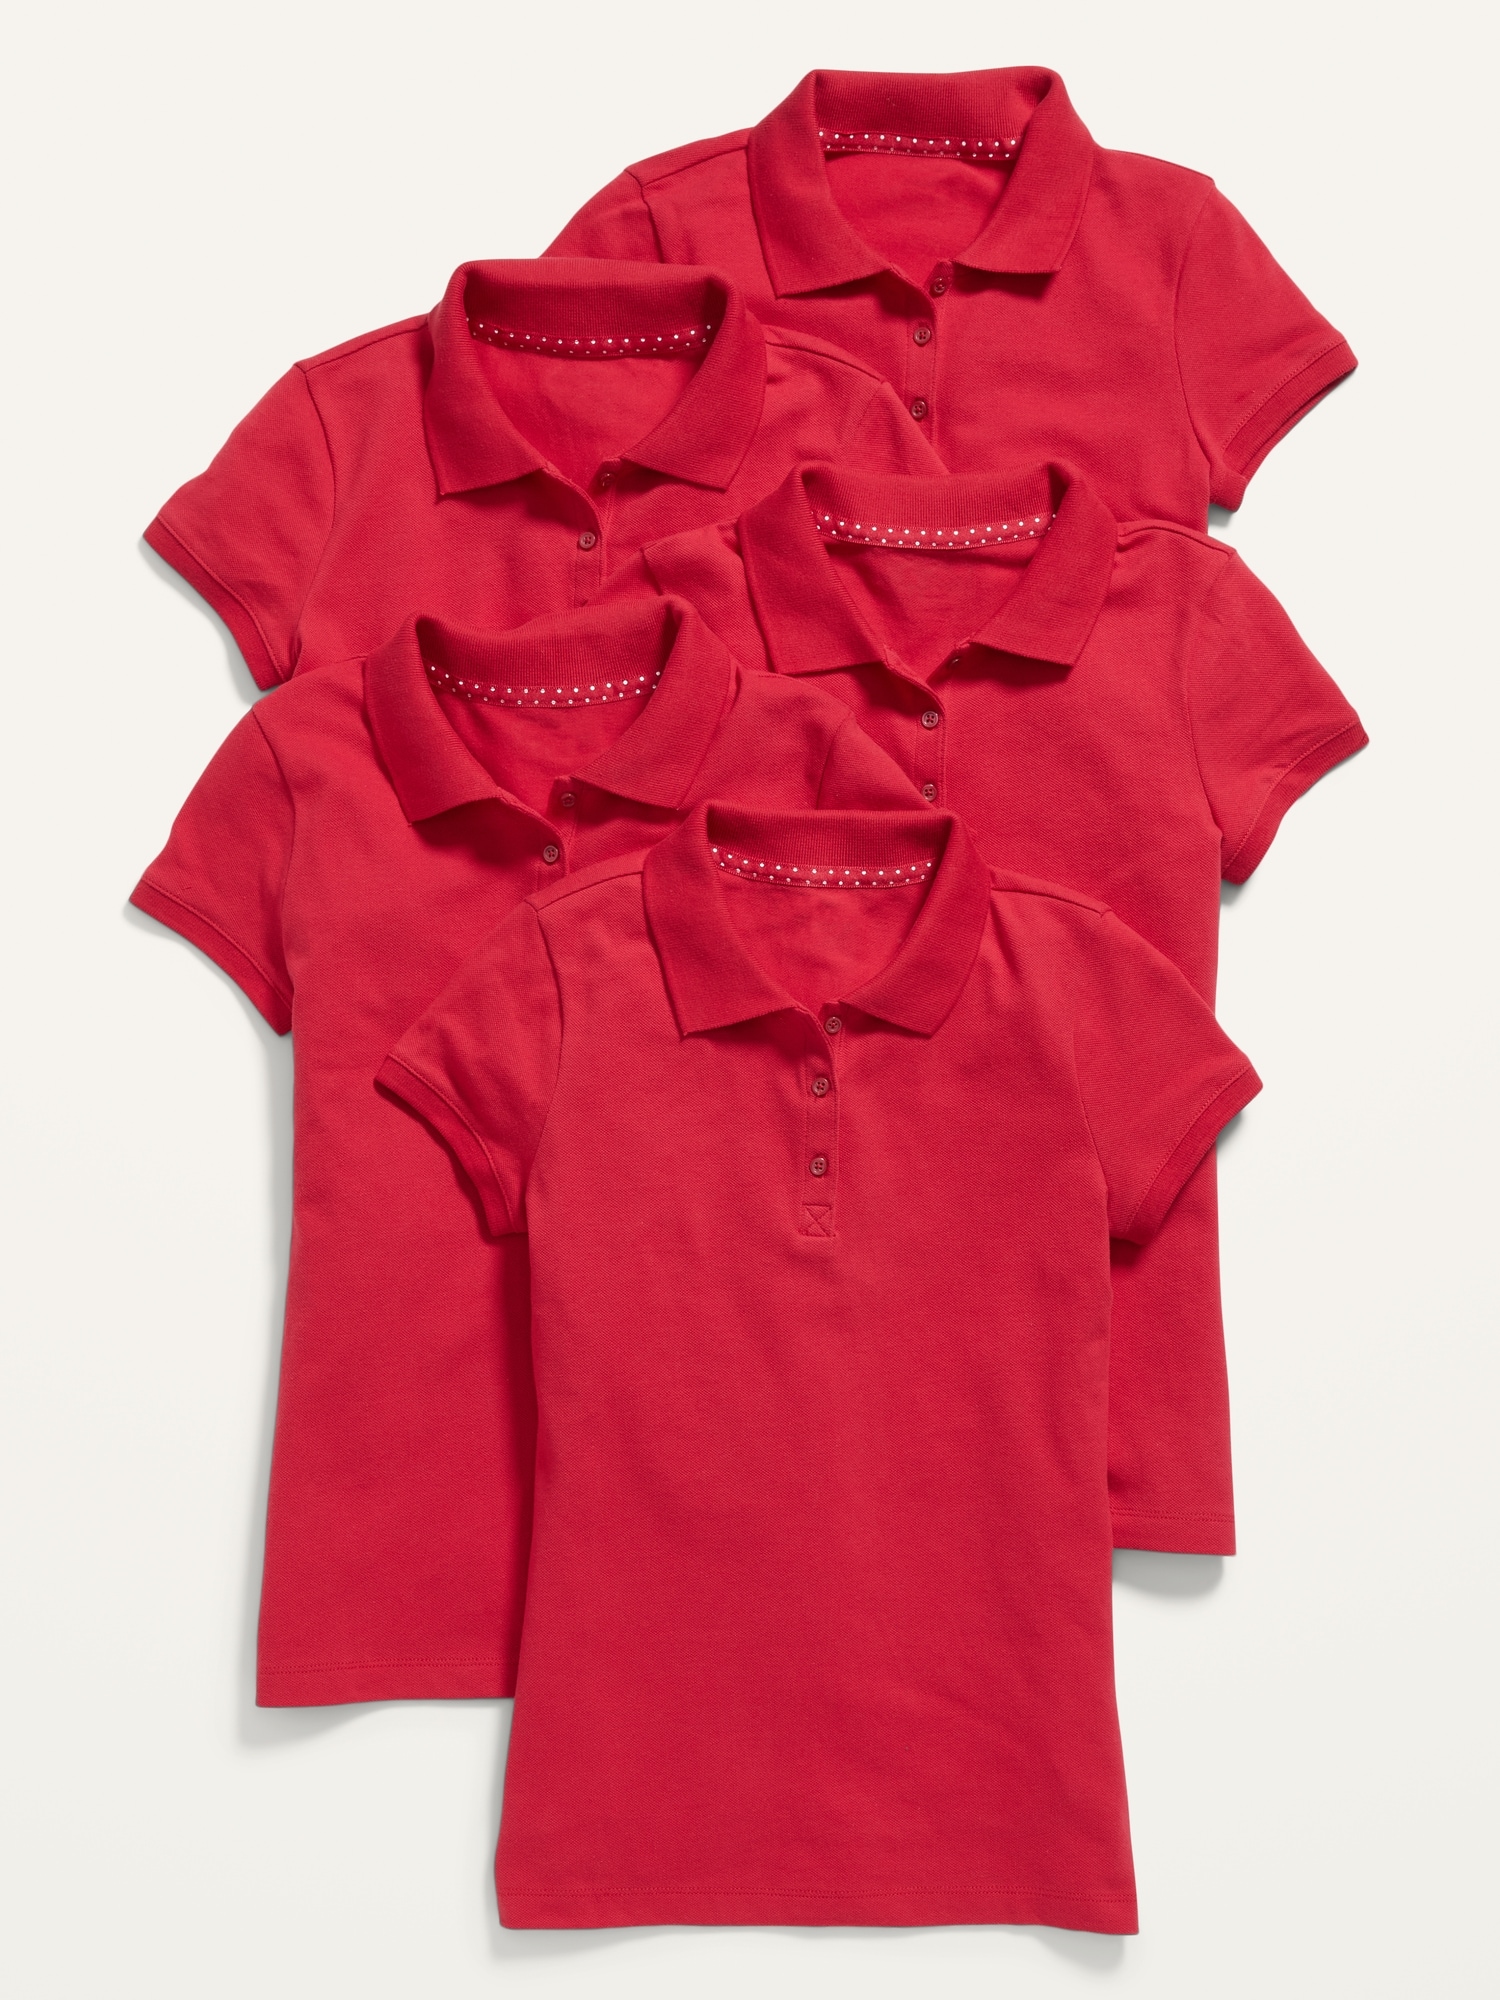 Old Navy Uniform Pique Polo Shirt 5-Pack for Girls red - 879375002